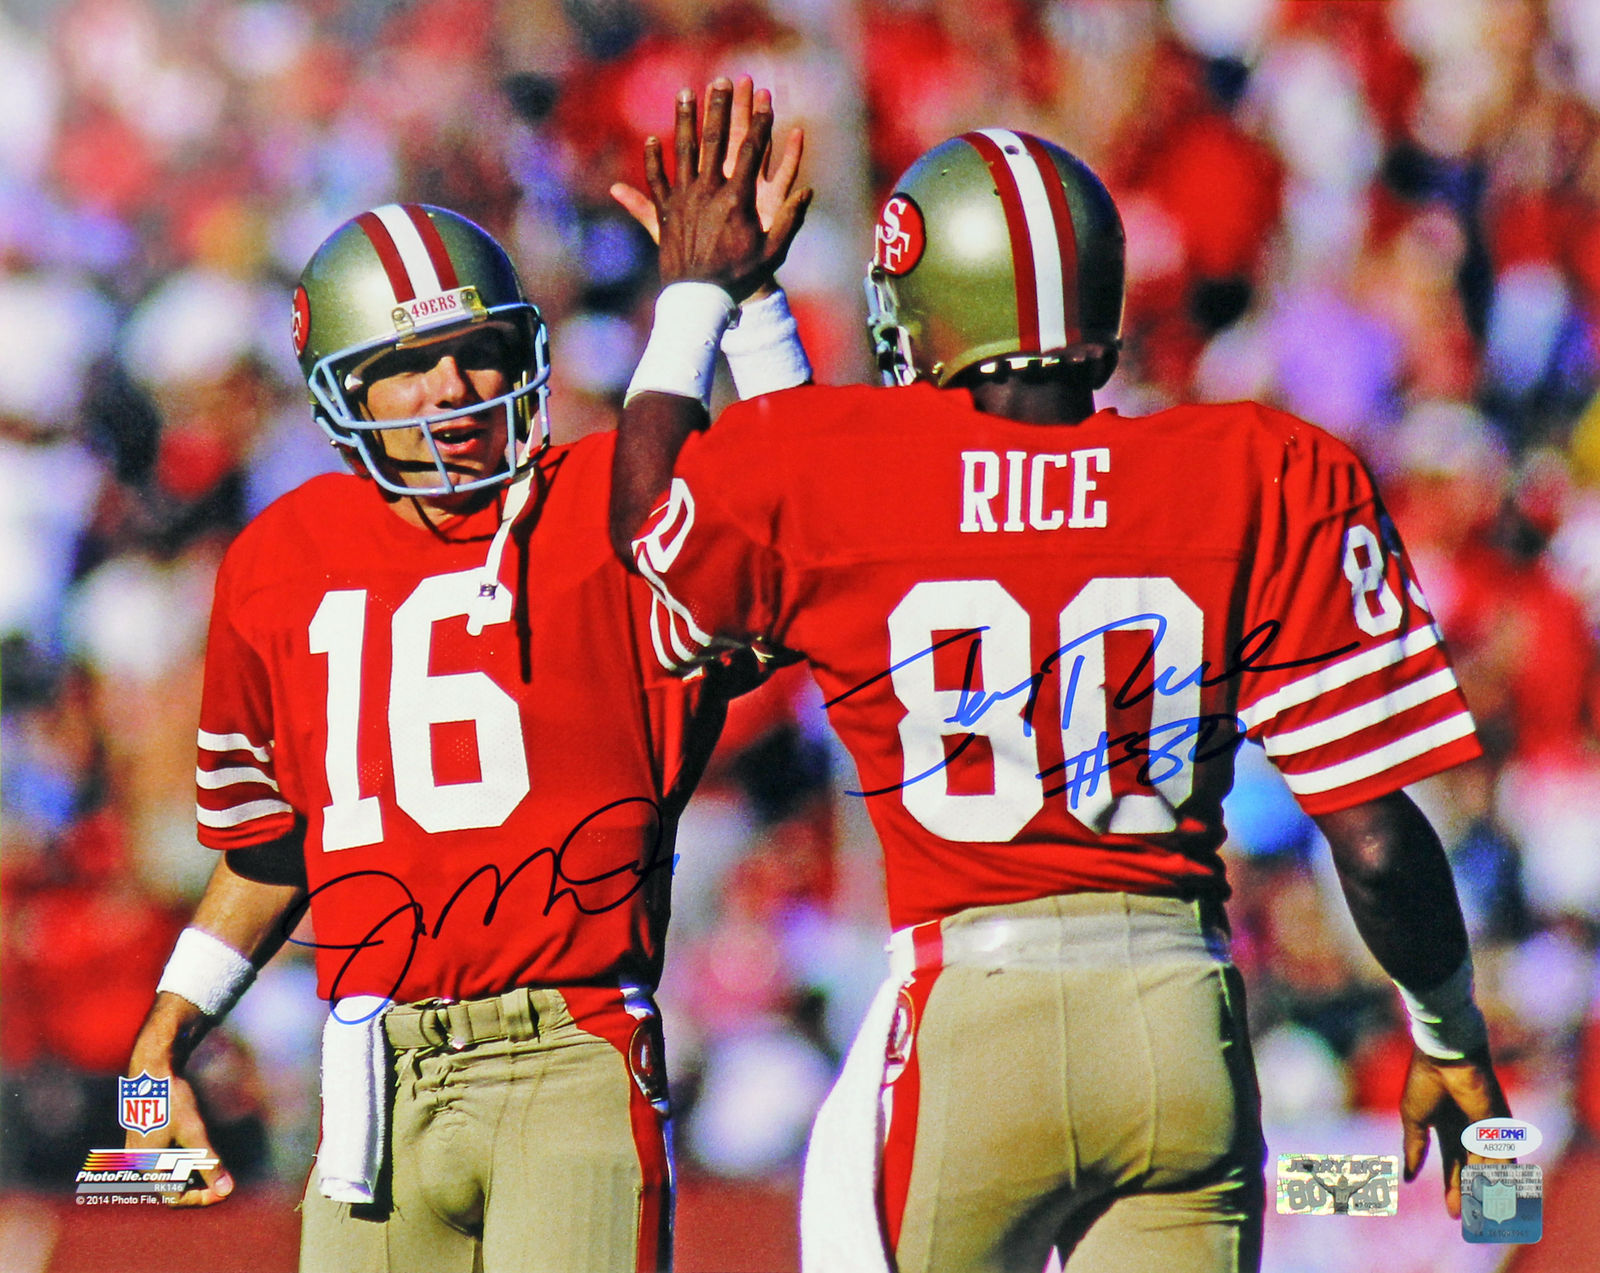 Joe Montana & Jerry Rice Signed 16" x 20" Color Photo in Cust...